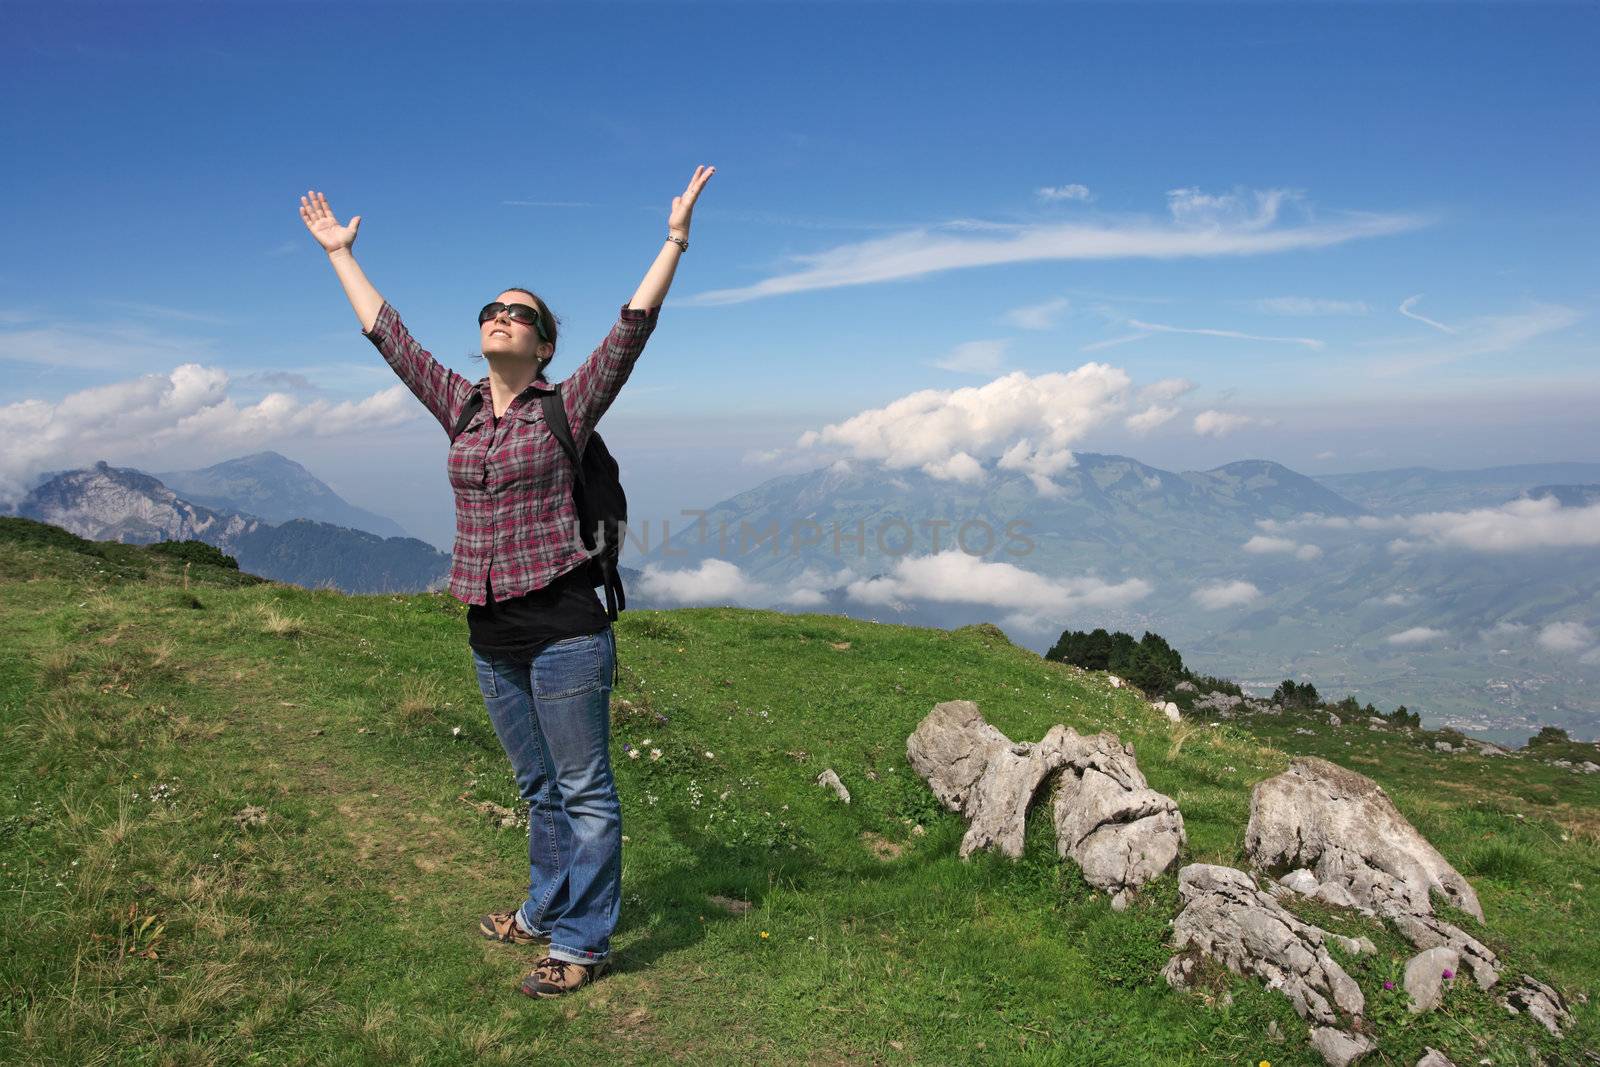 Photo of an active female with backpack and hands pointing to the sky while hiking up a mountain trail.